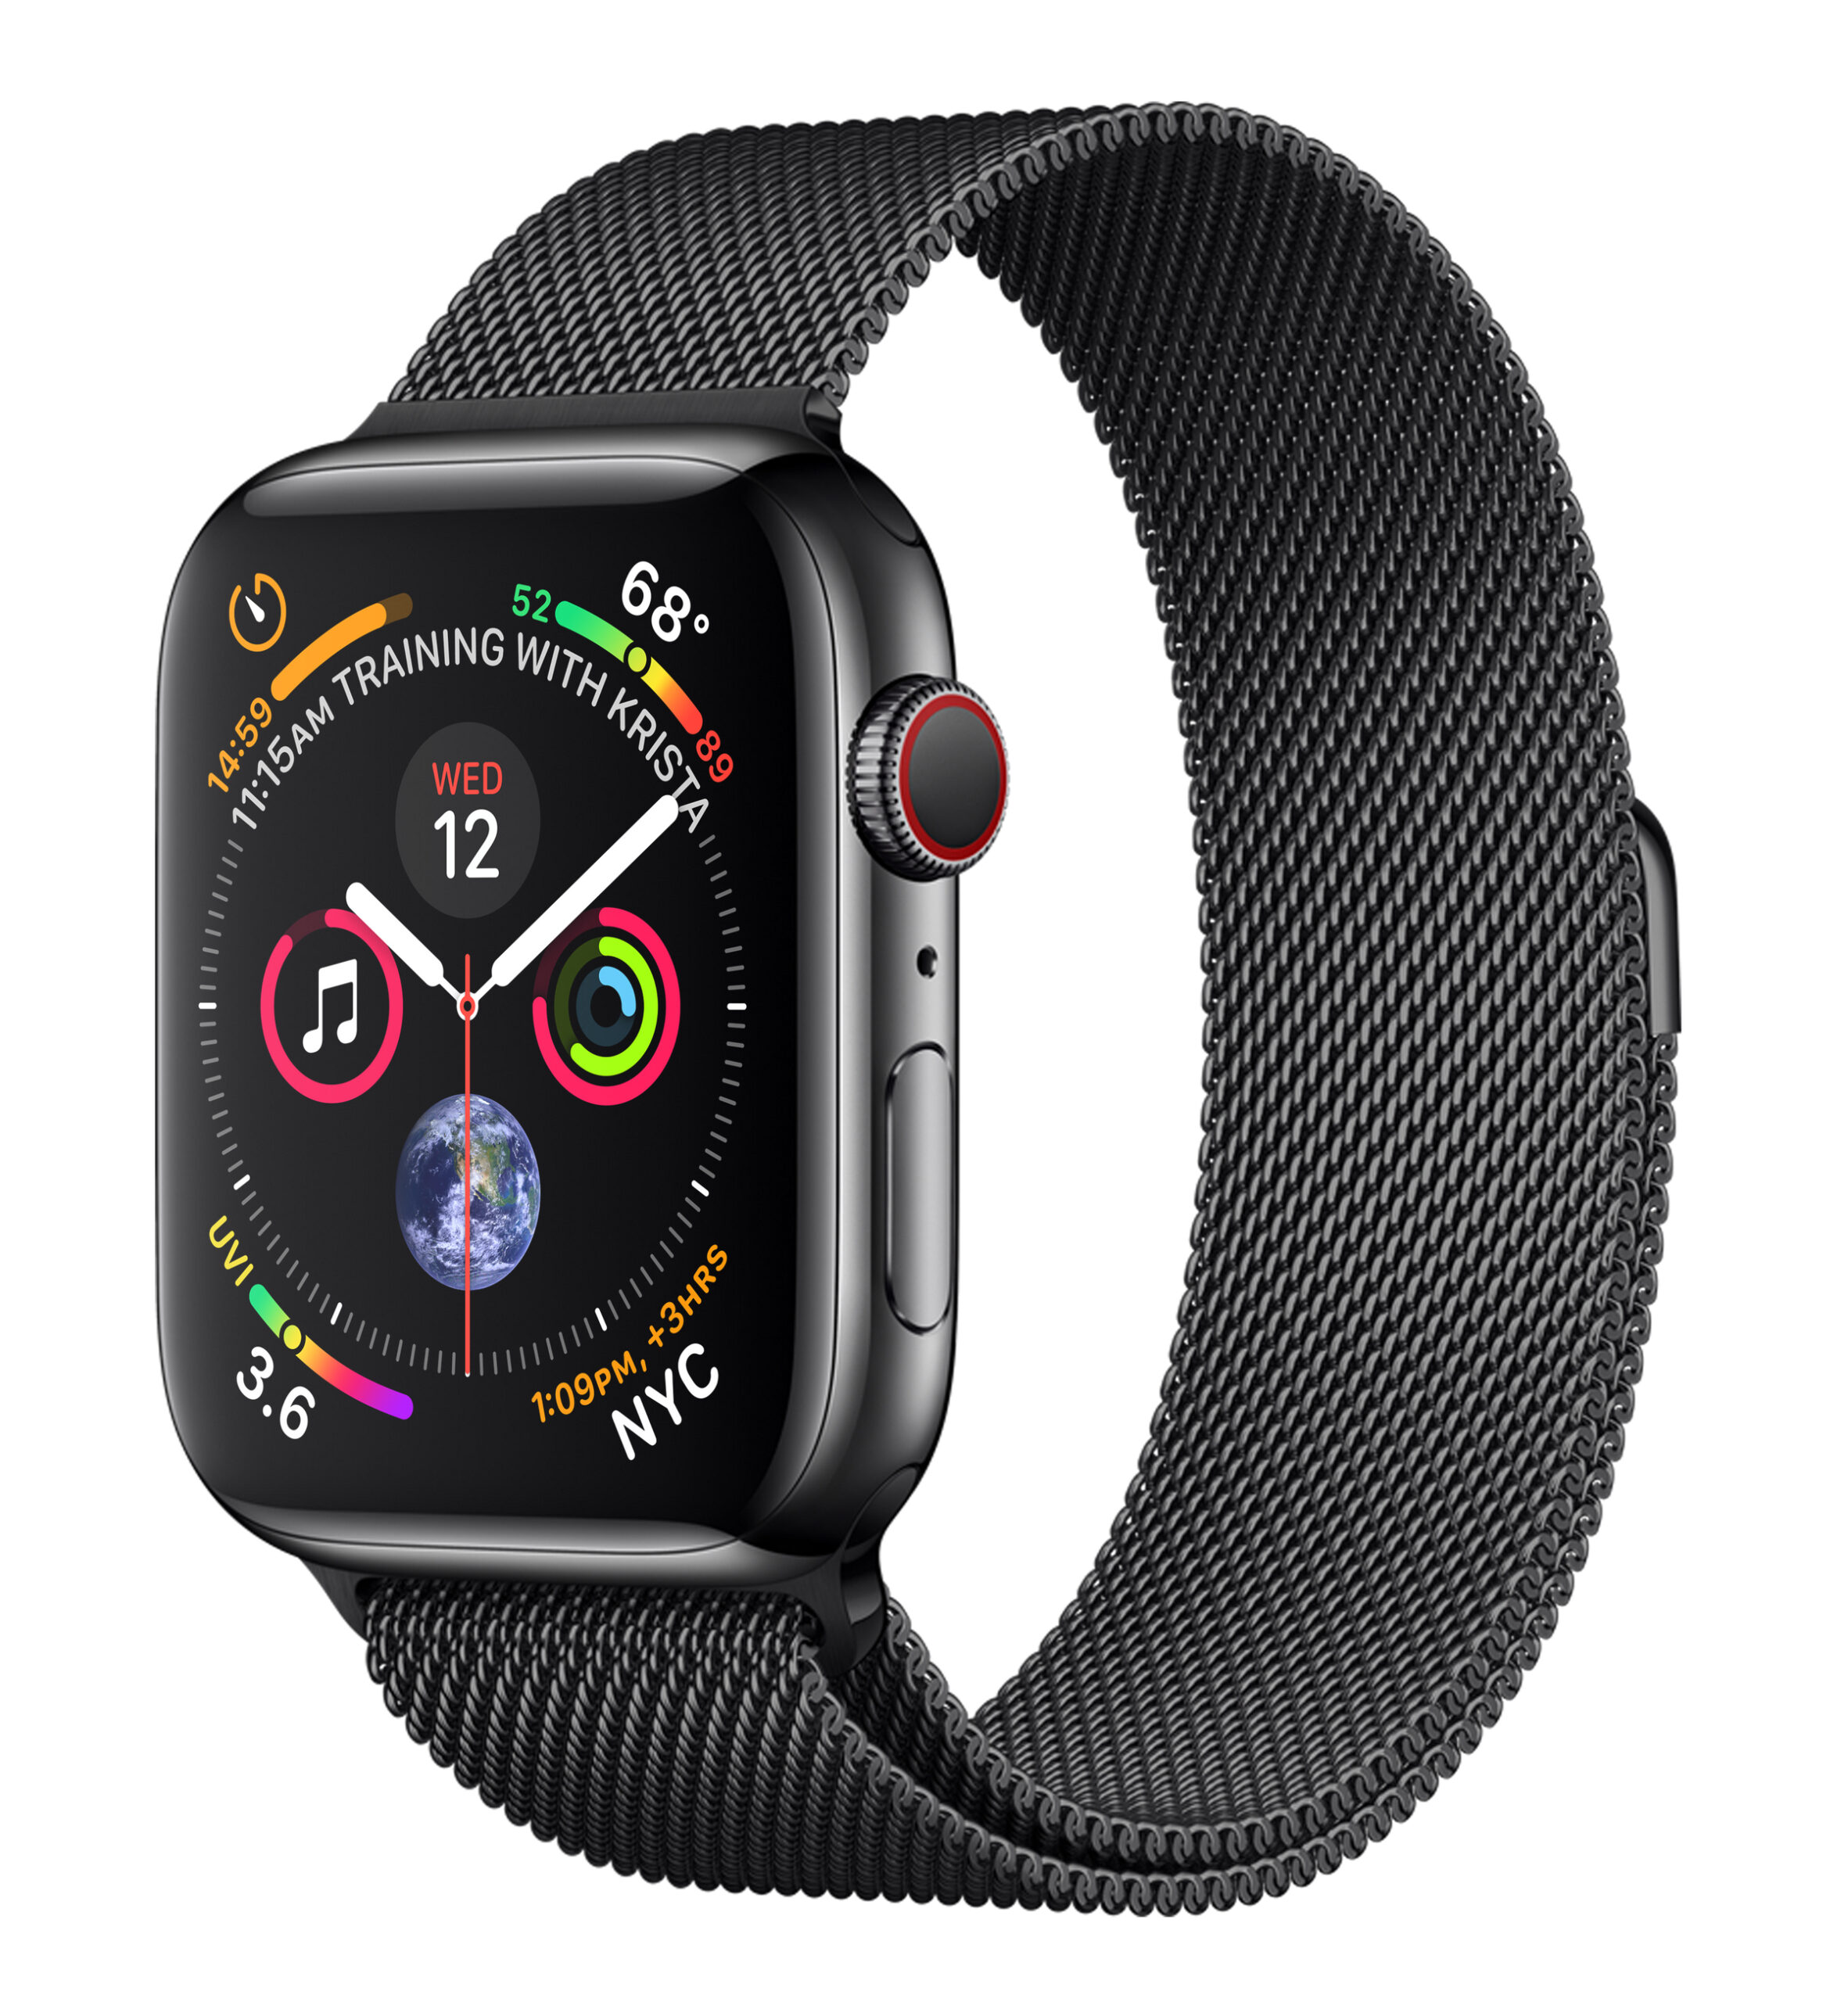 MTV62LL/A - $658 - Apple Watch Series 4 (GPS + Cellular, 44mm, Space